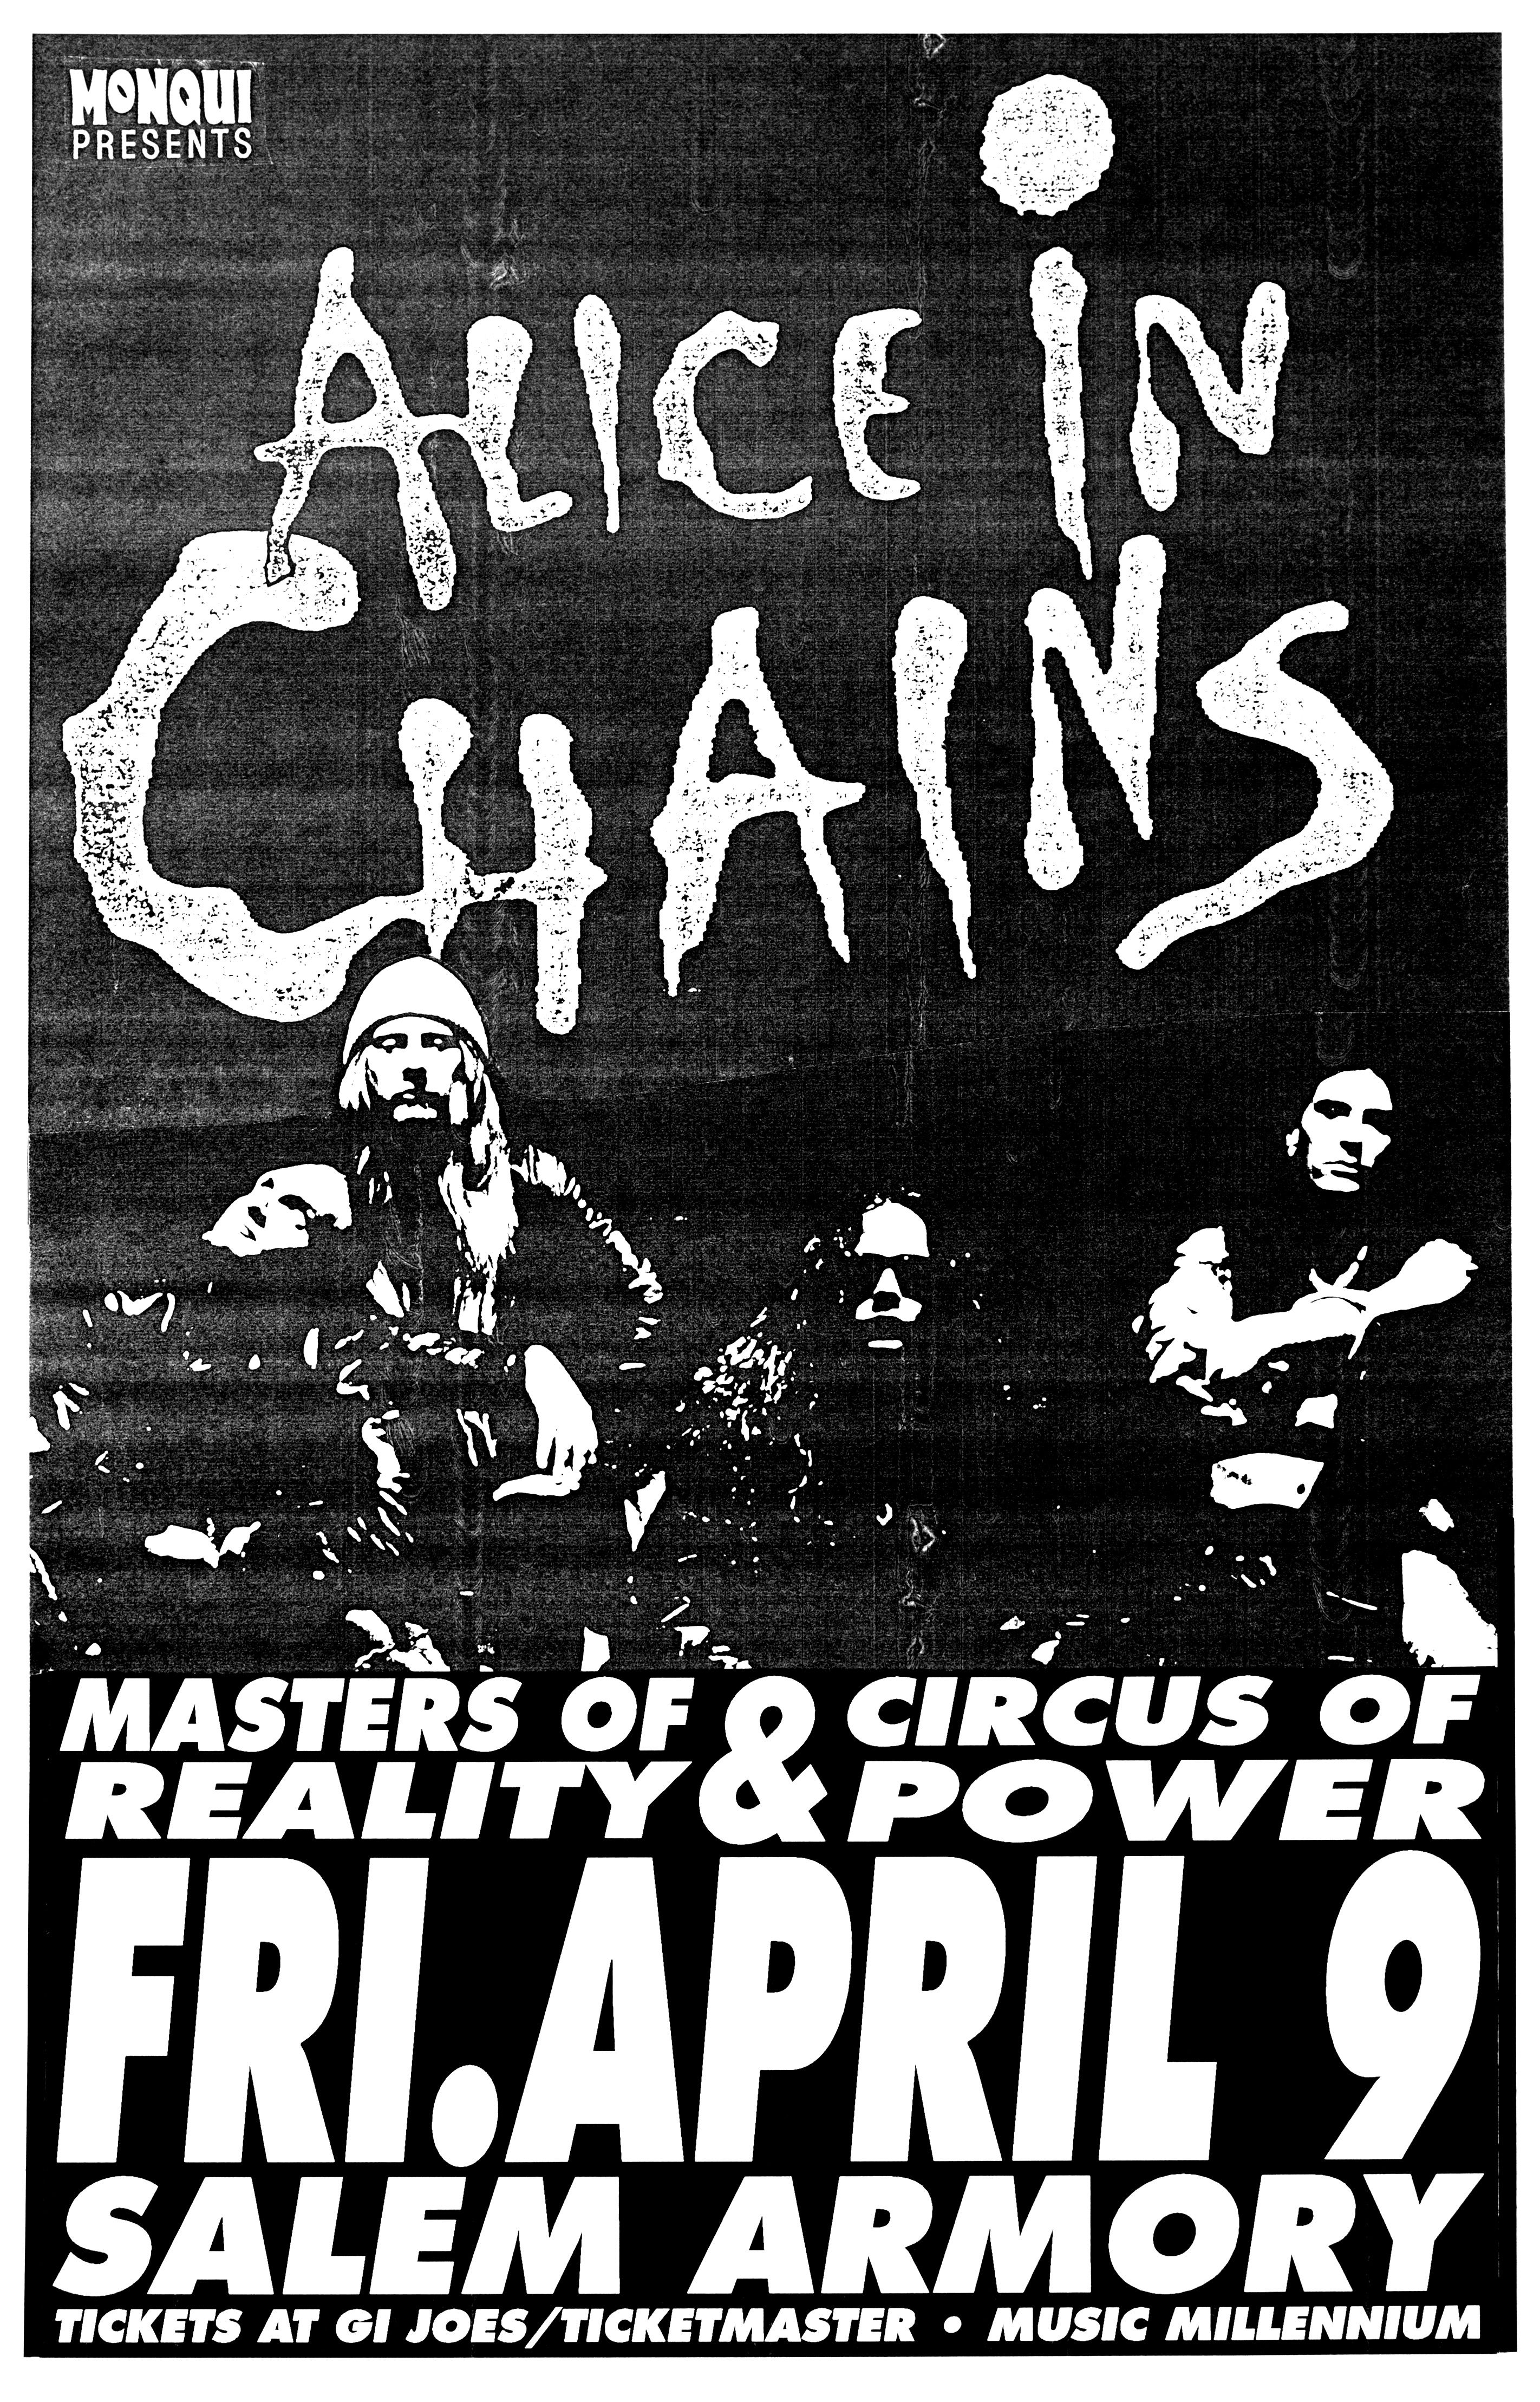 MXP-145.11 Alice In Chains 1993 Salem Armory  Apr 9 Concert Poster